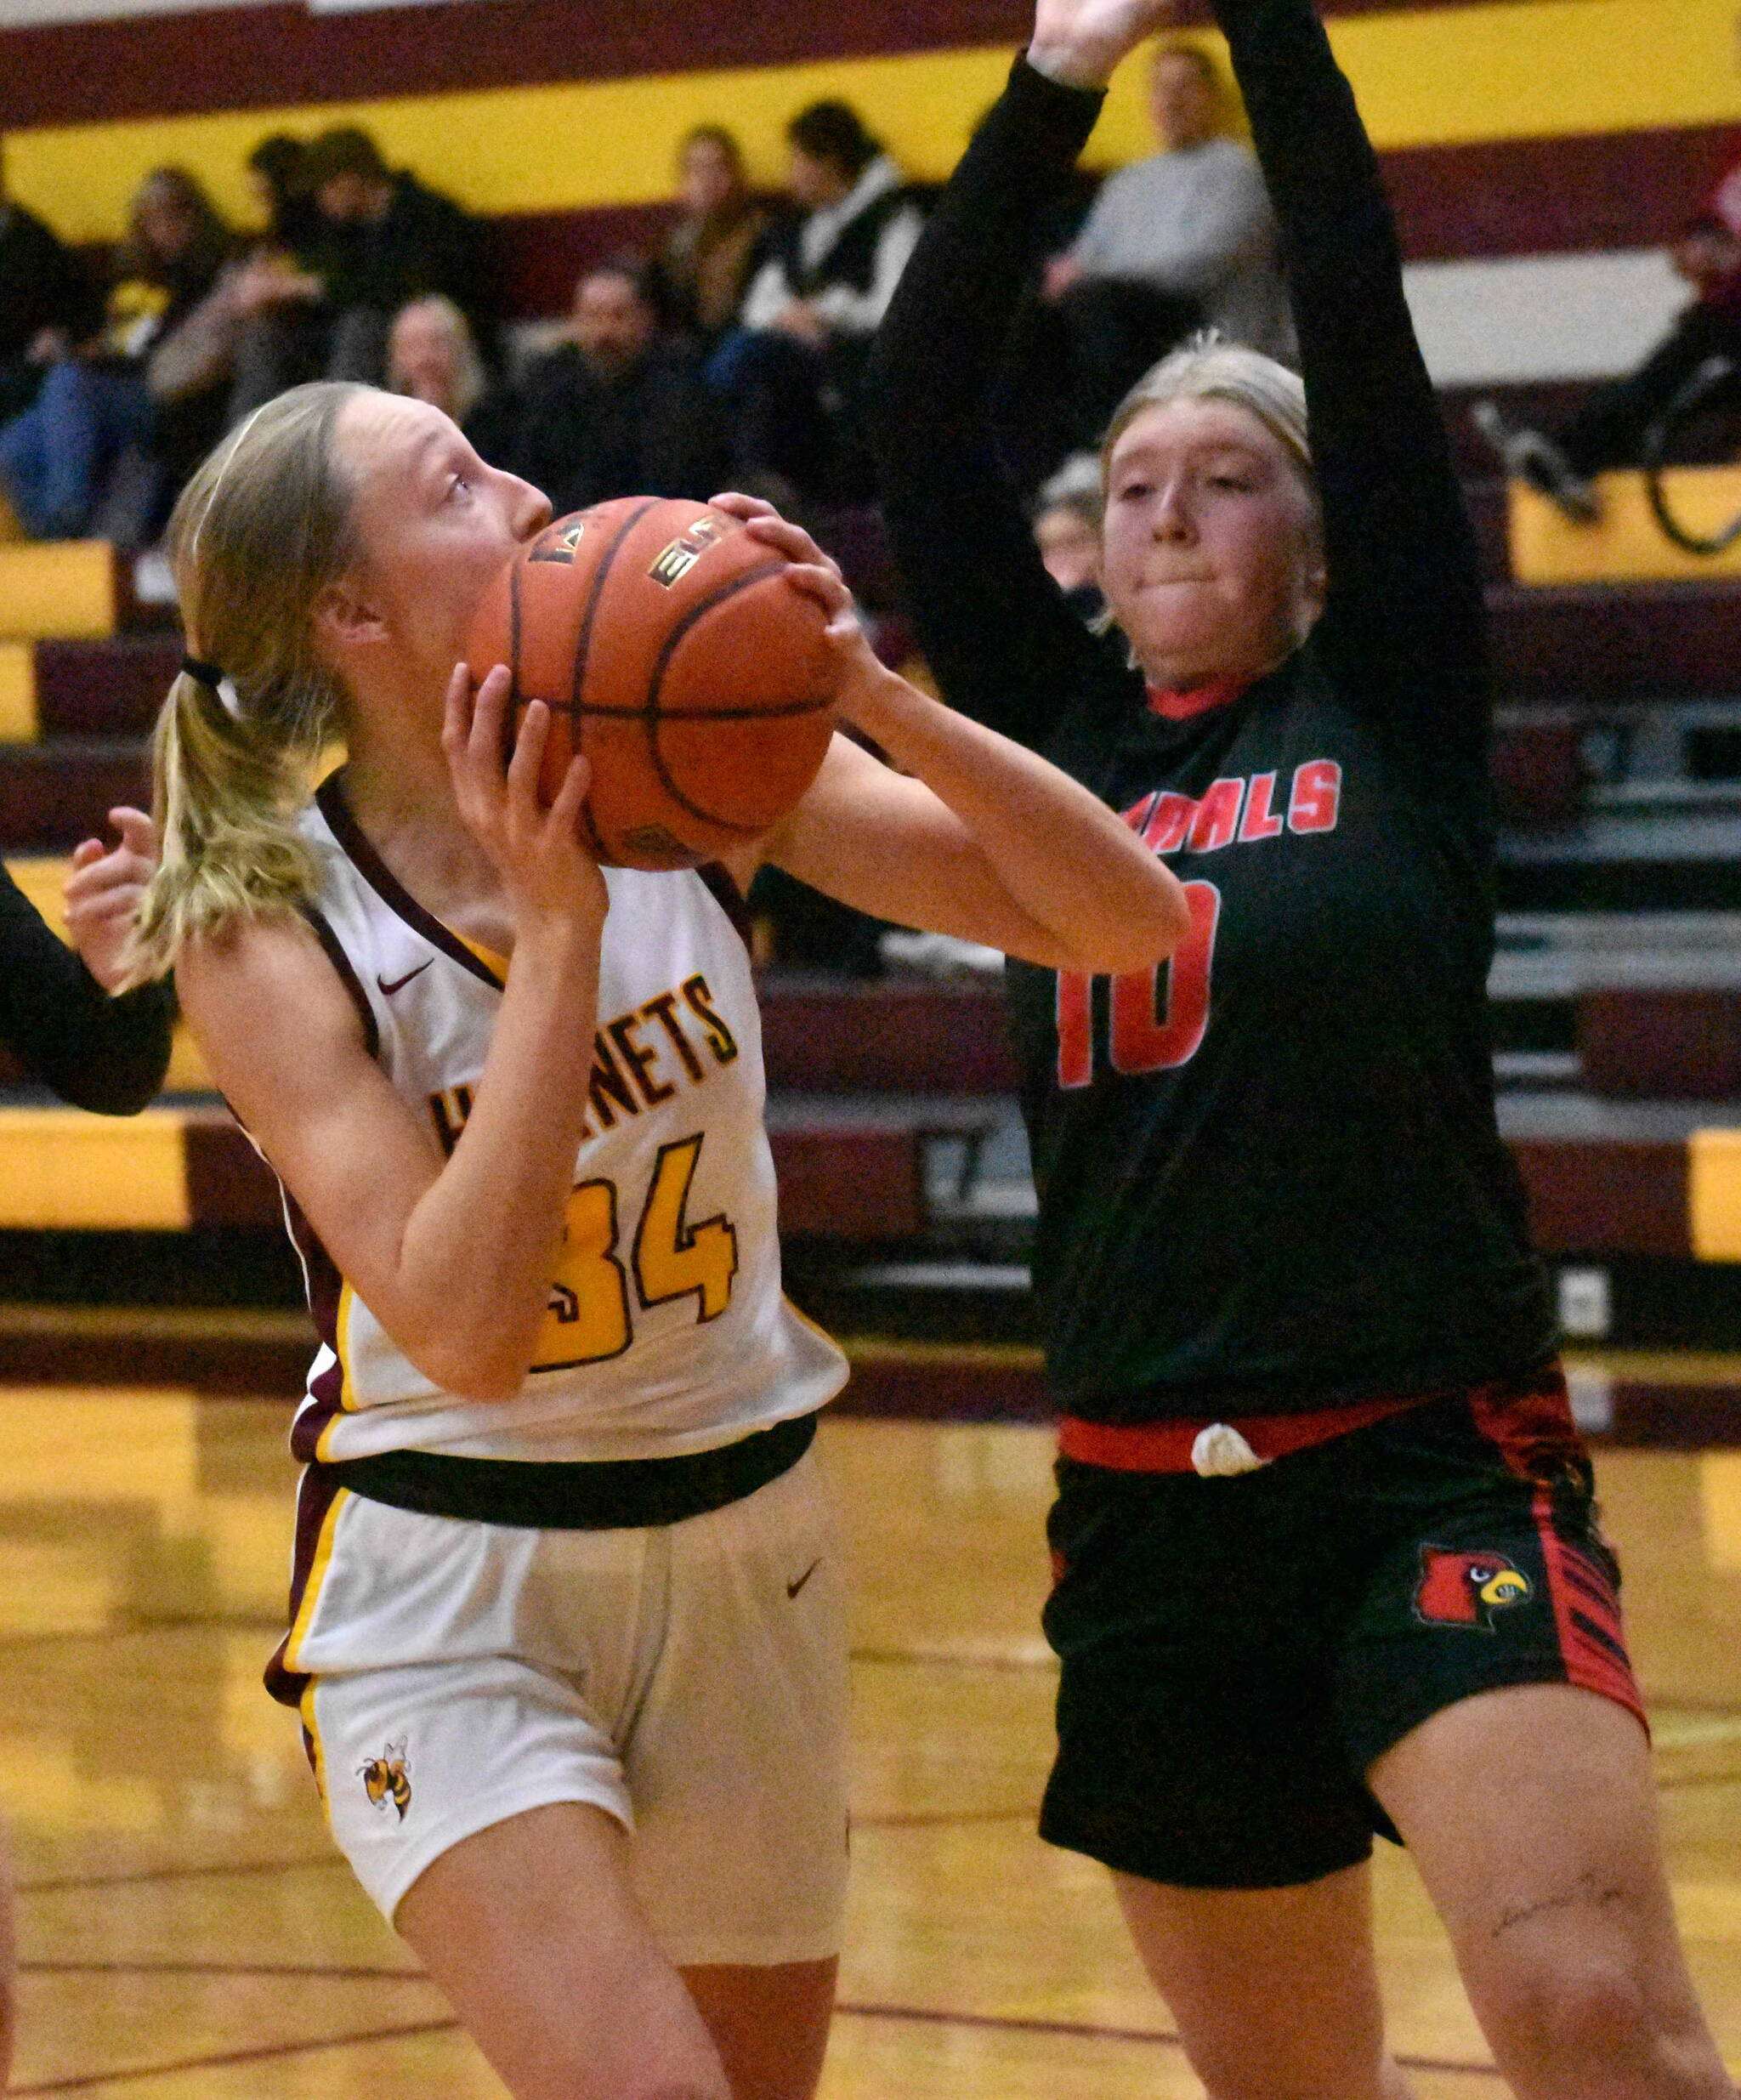 Photo by Kevin Hanson
WRHS’ Vivian Kingston (34) prepares to put up a shot under the basket during a match against the Orting Cardinals last year; the Hornets came away with a 68-16 win.